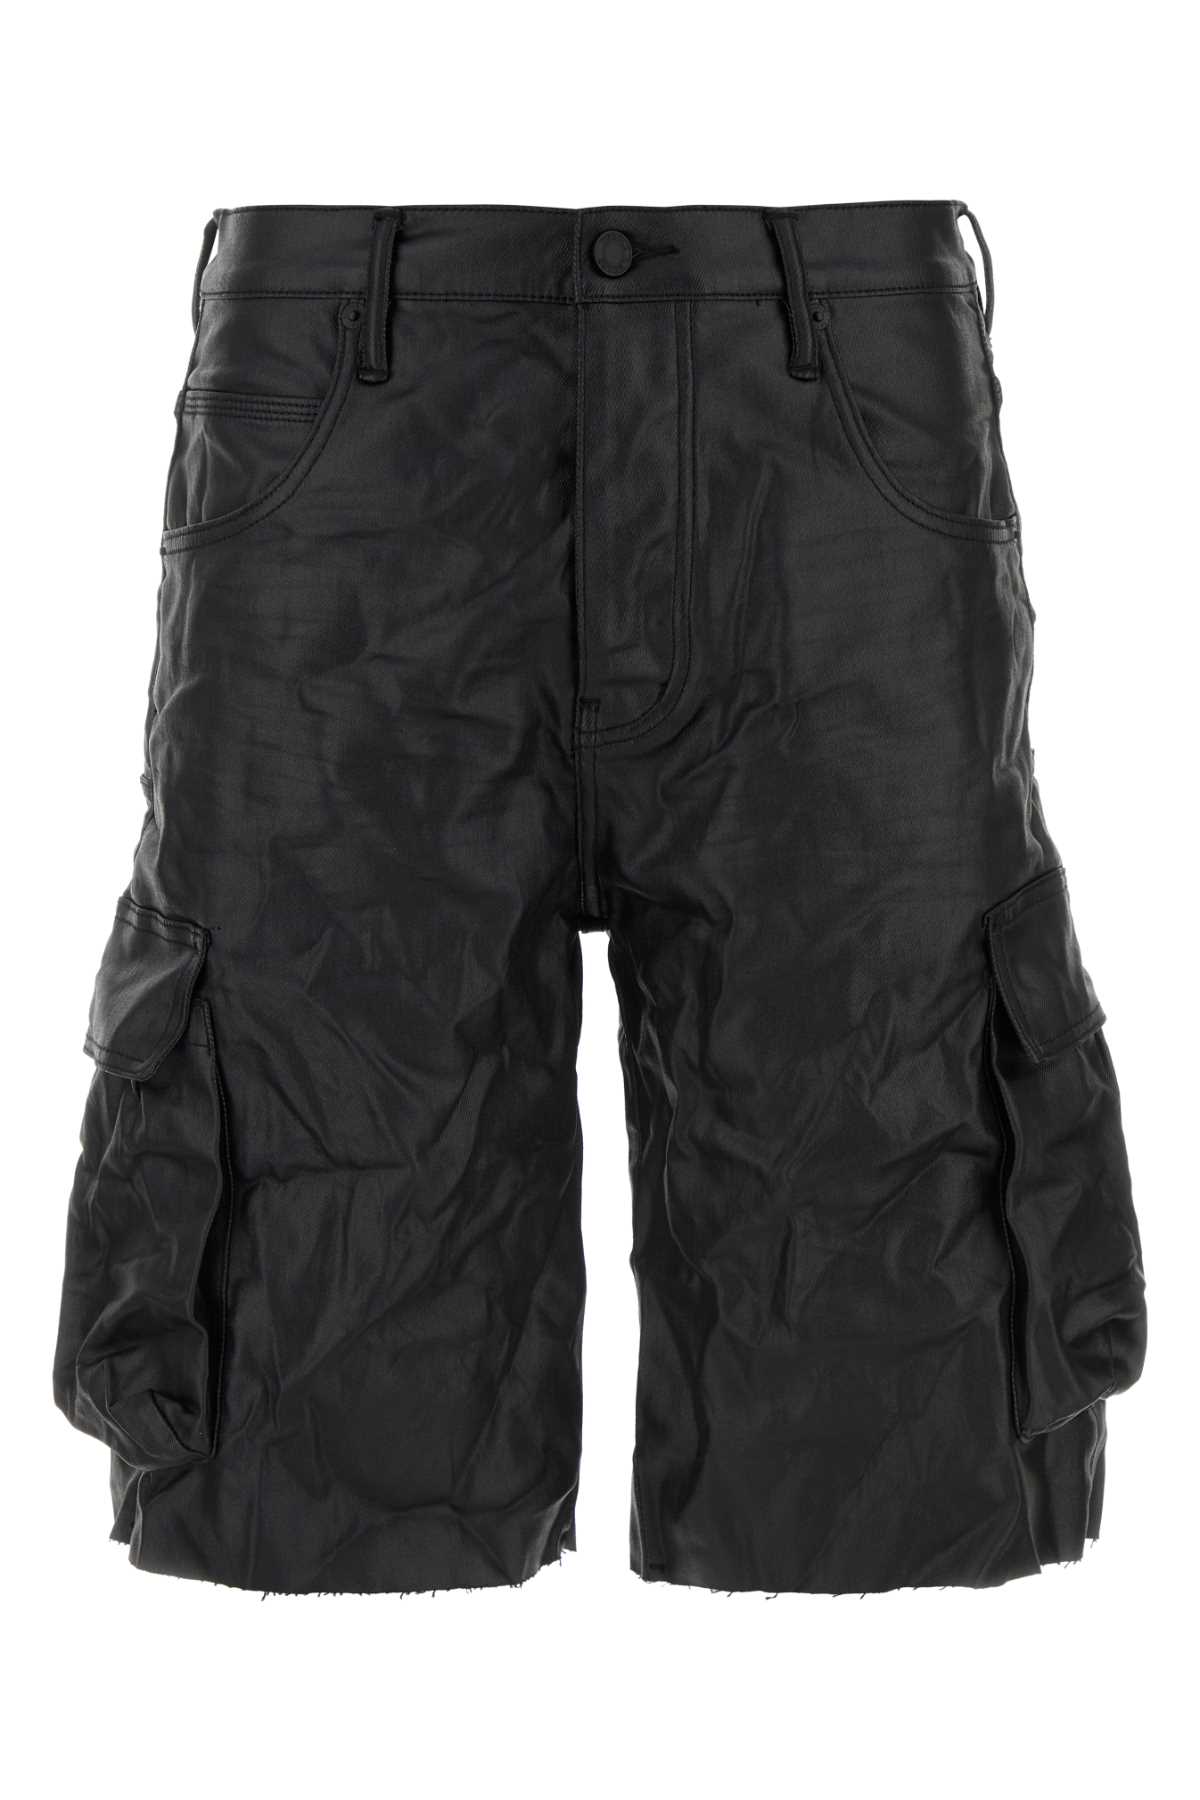 Black Stretch Synthetic Leather P022 Bermuda Shorts